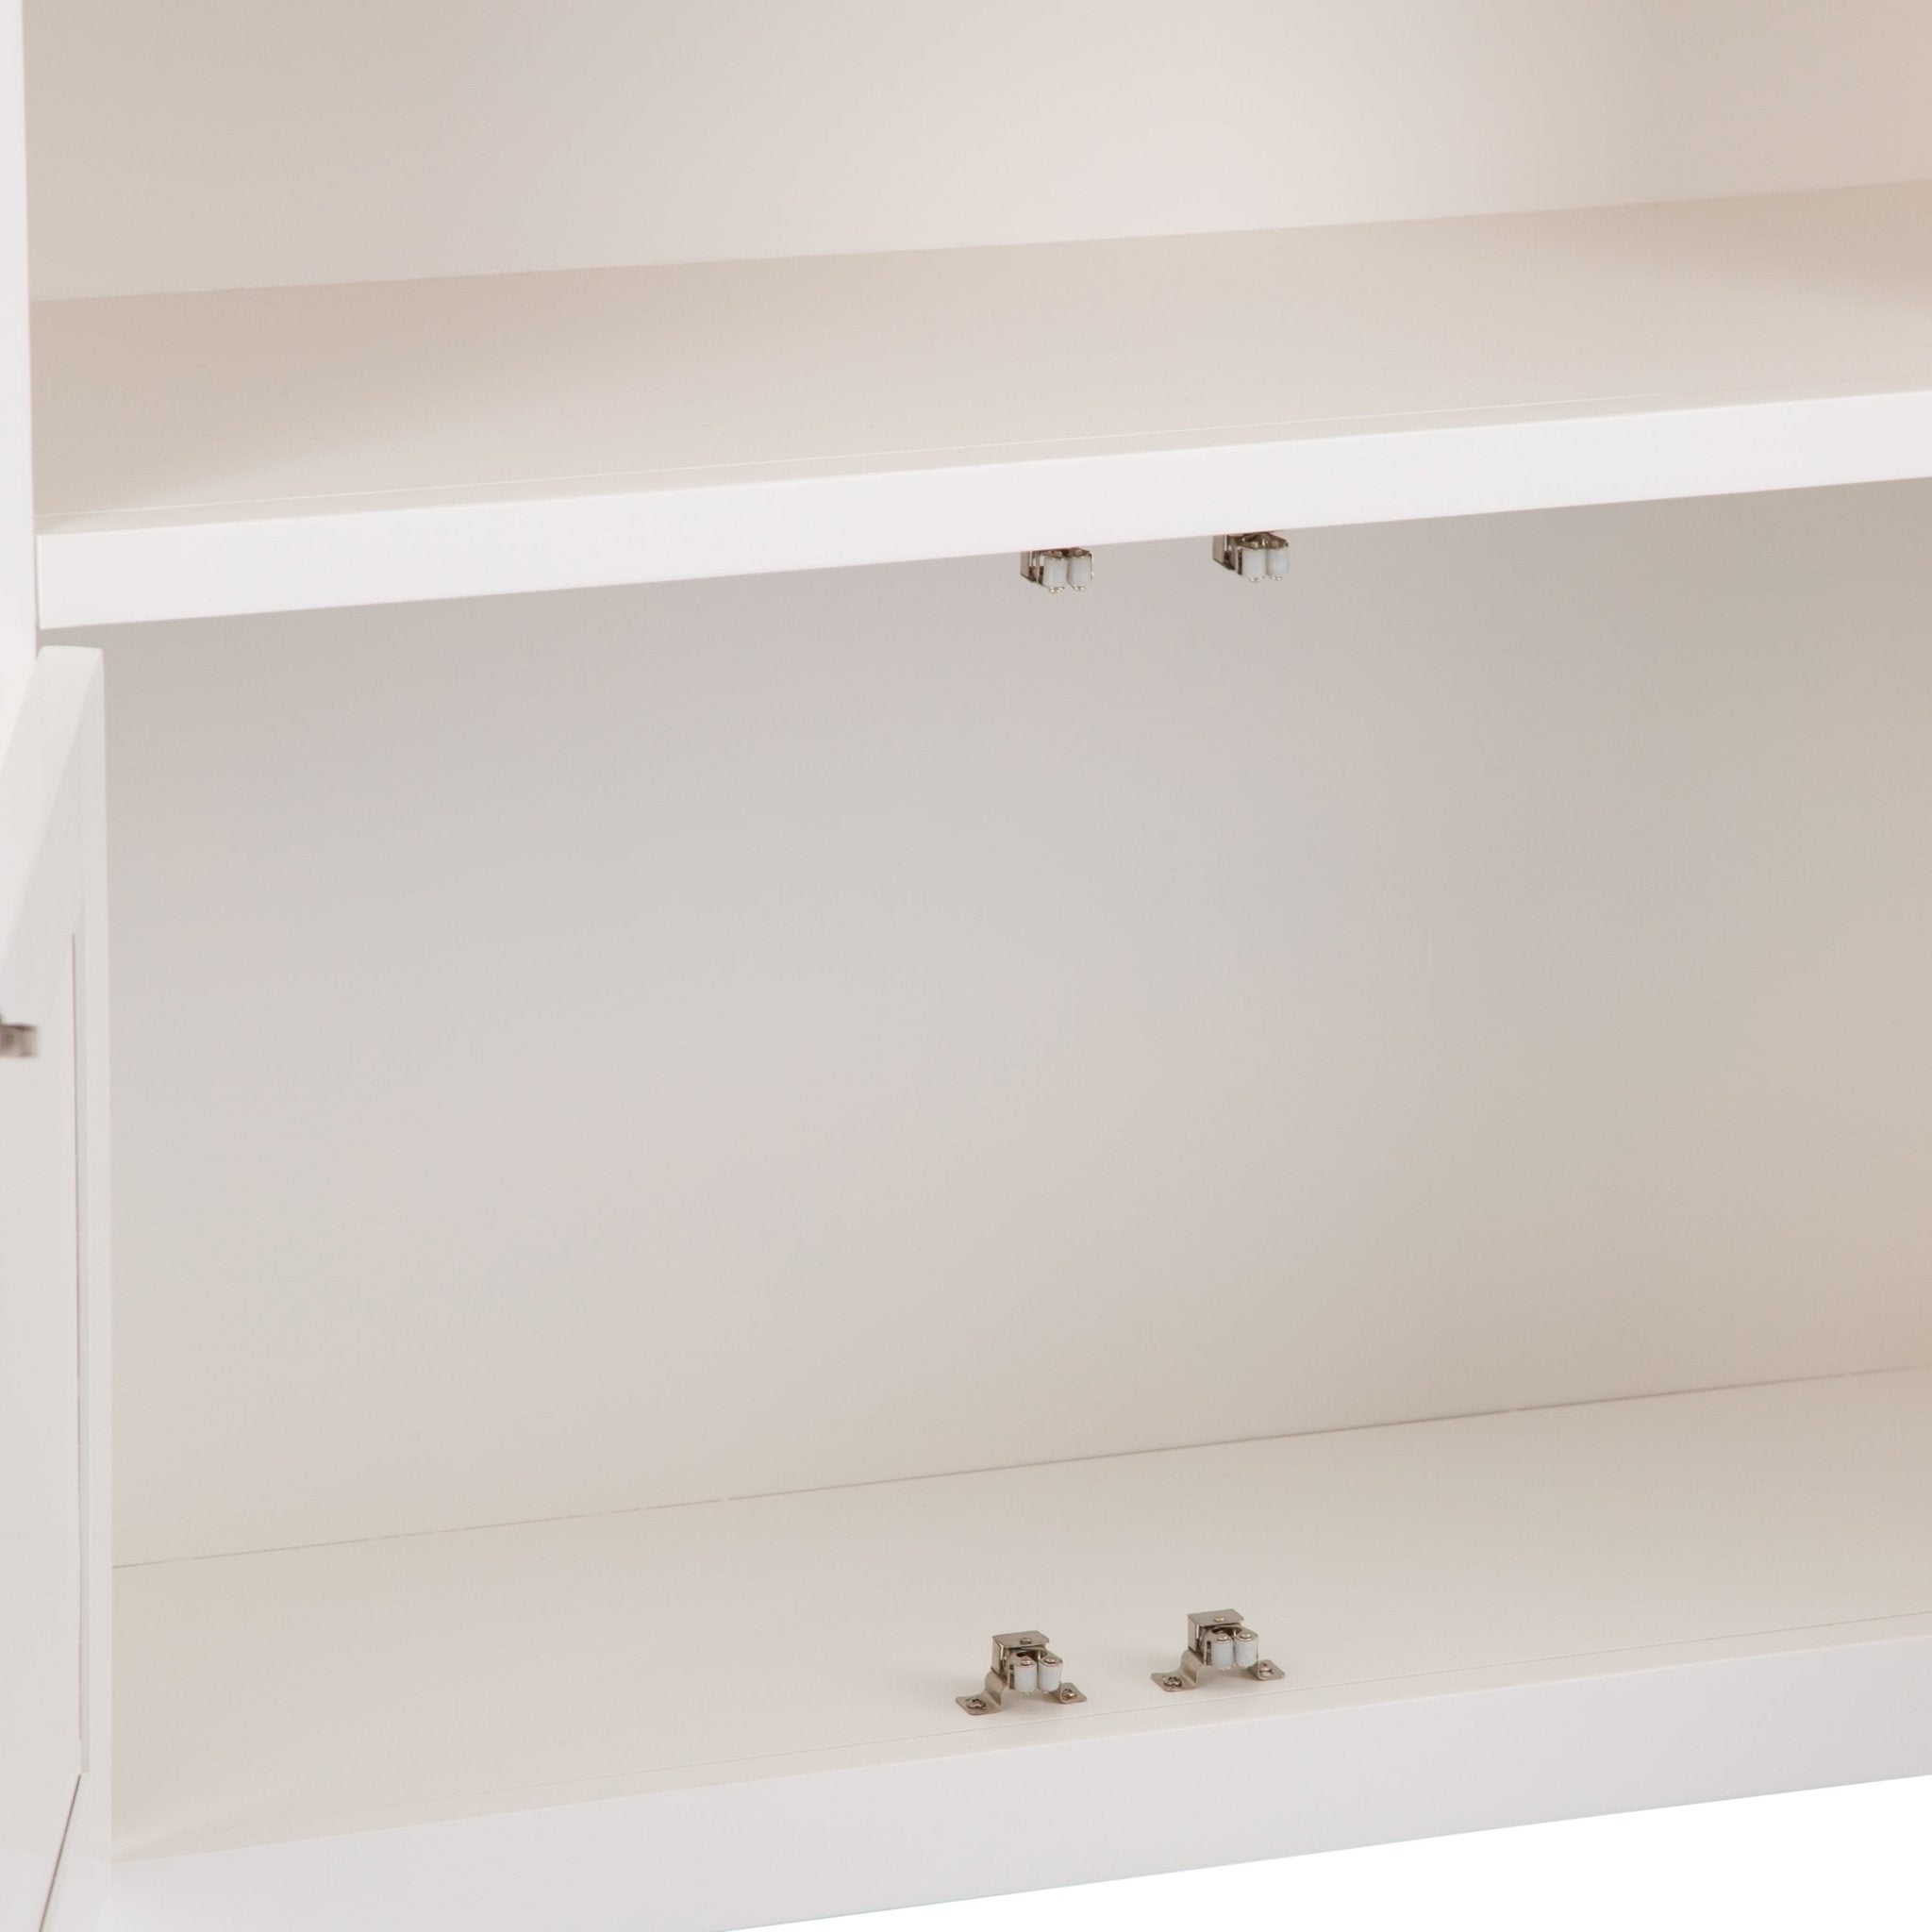 Windsor White Large Wide Bookcase - Duck Barn Interiors